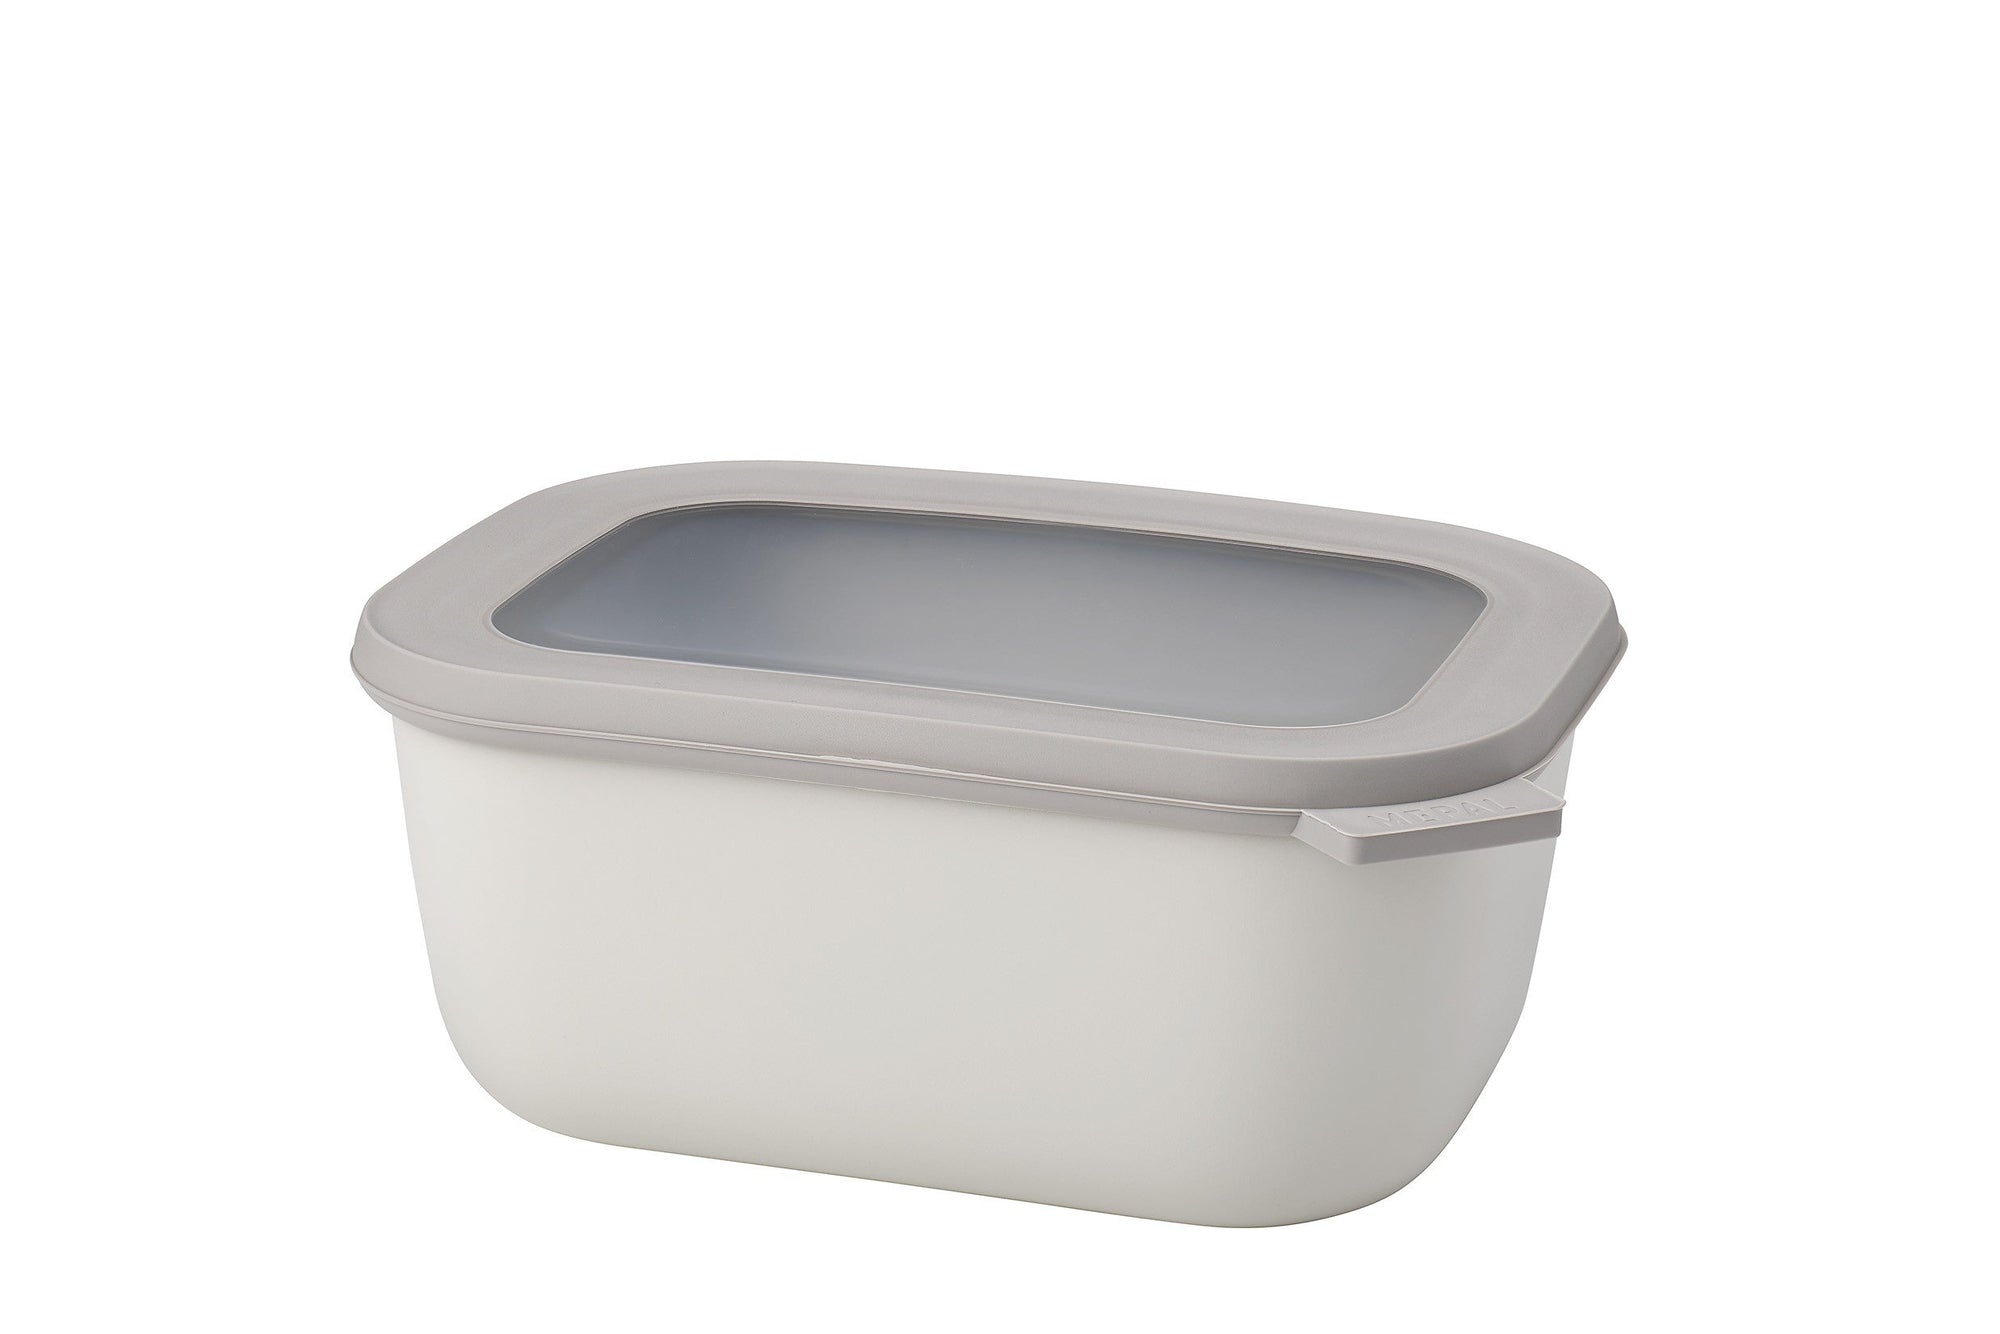 Cirqula 1.5L Freezer Container Nordic White - KITCHEN - Food Containers - Soko and Co